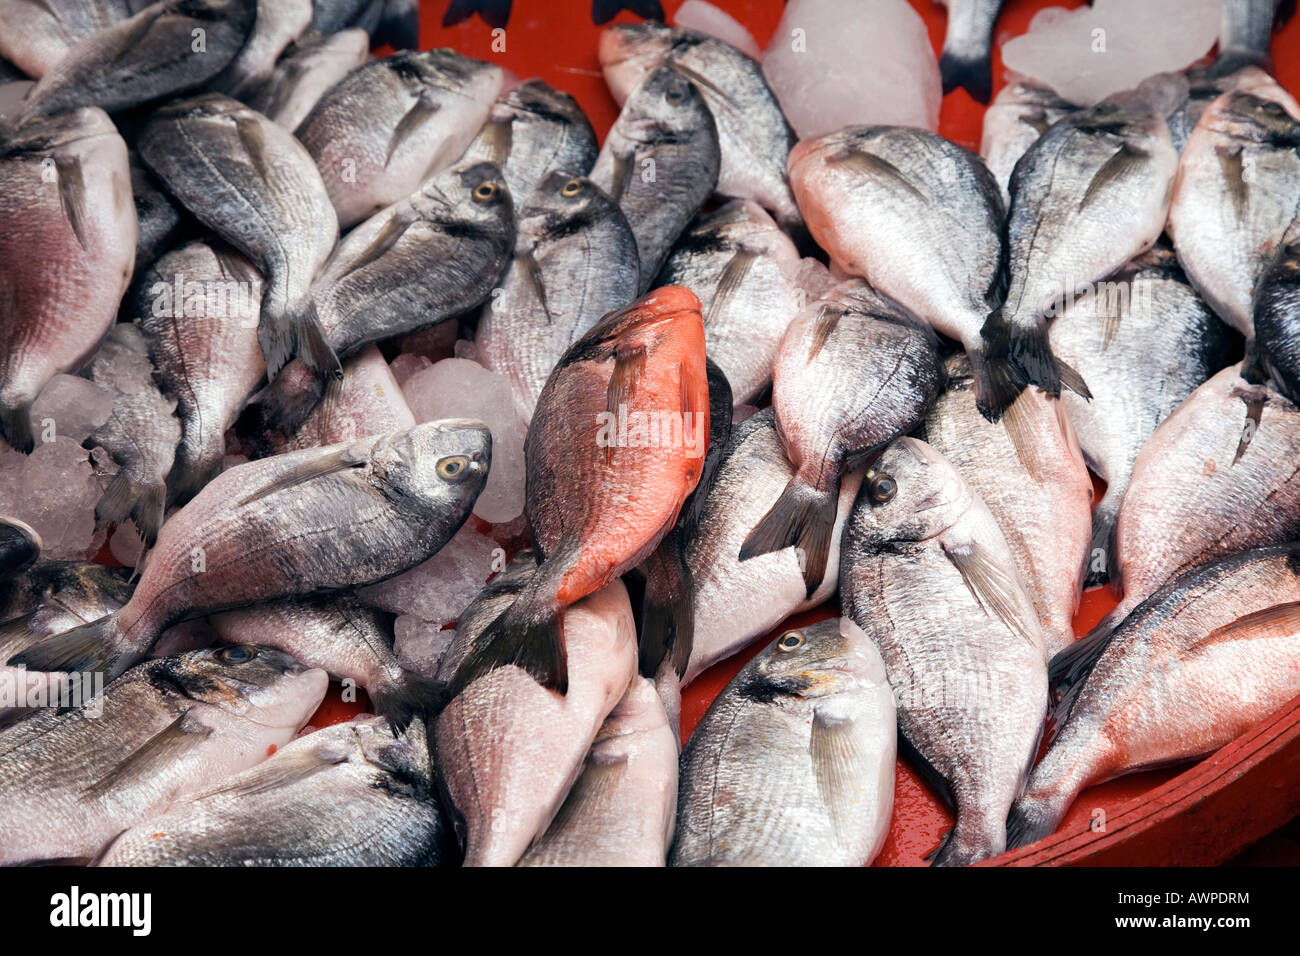 Fish for sale at a marketplace in Manavgat, Turkey, Asia Stock Photo